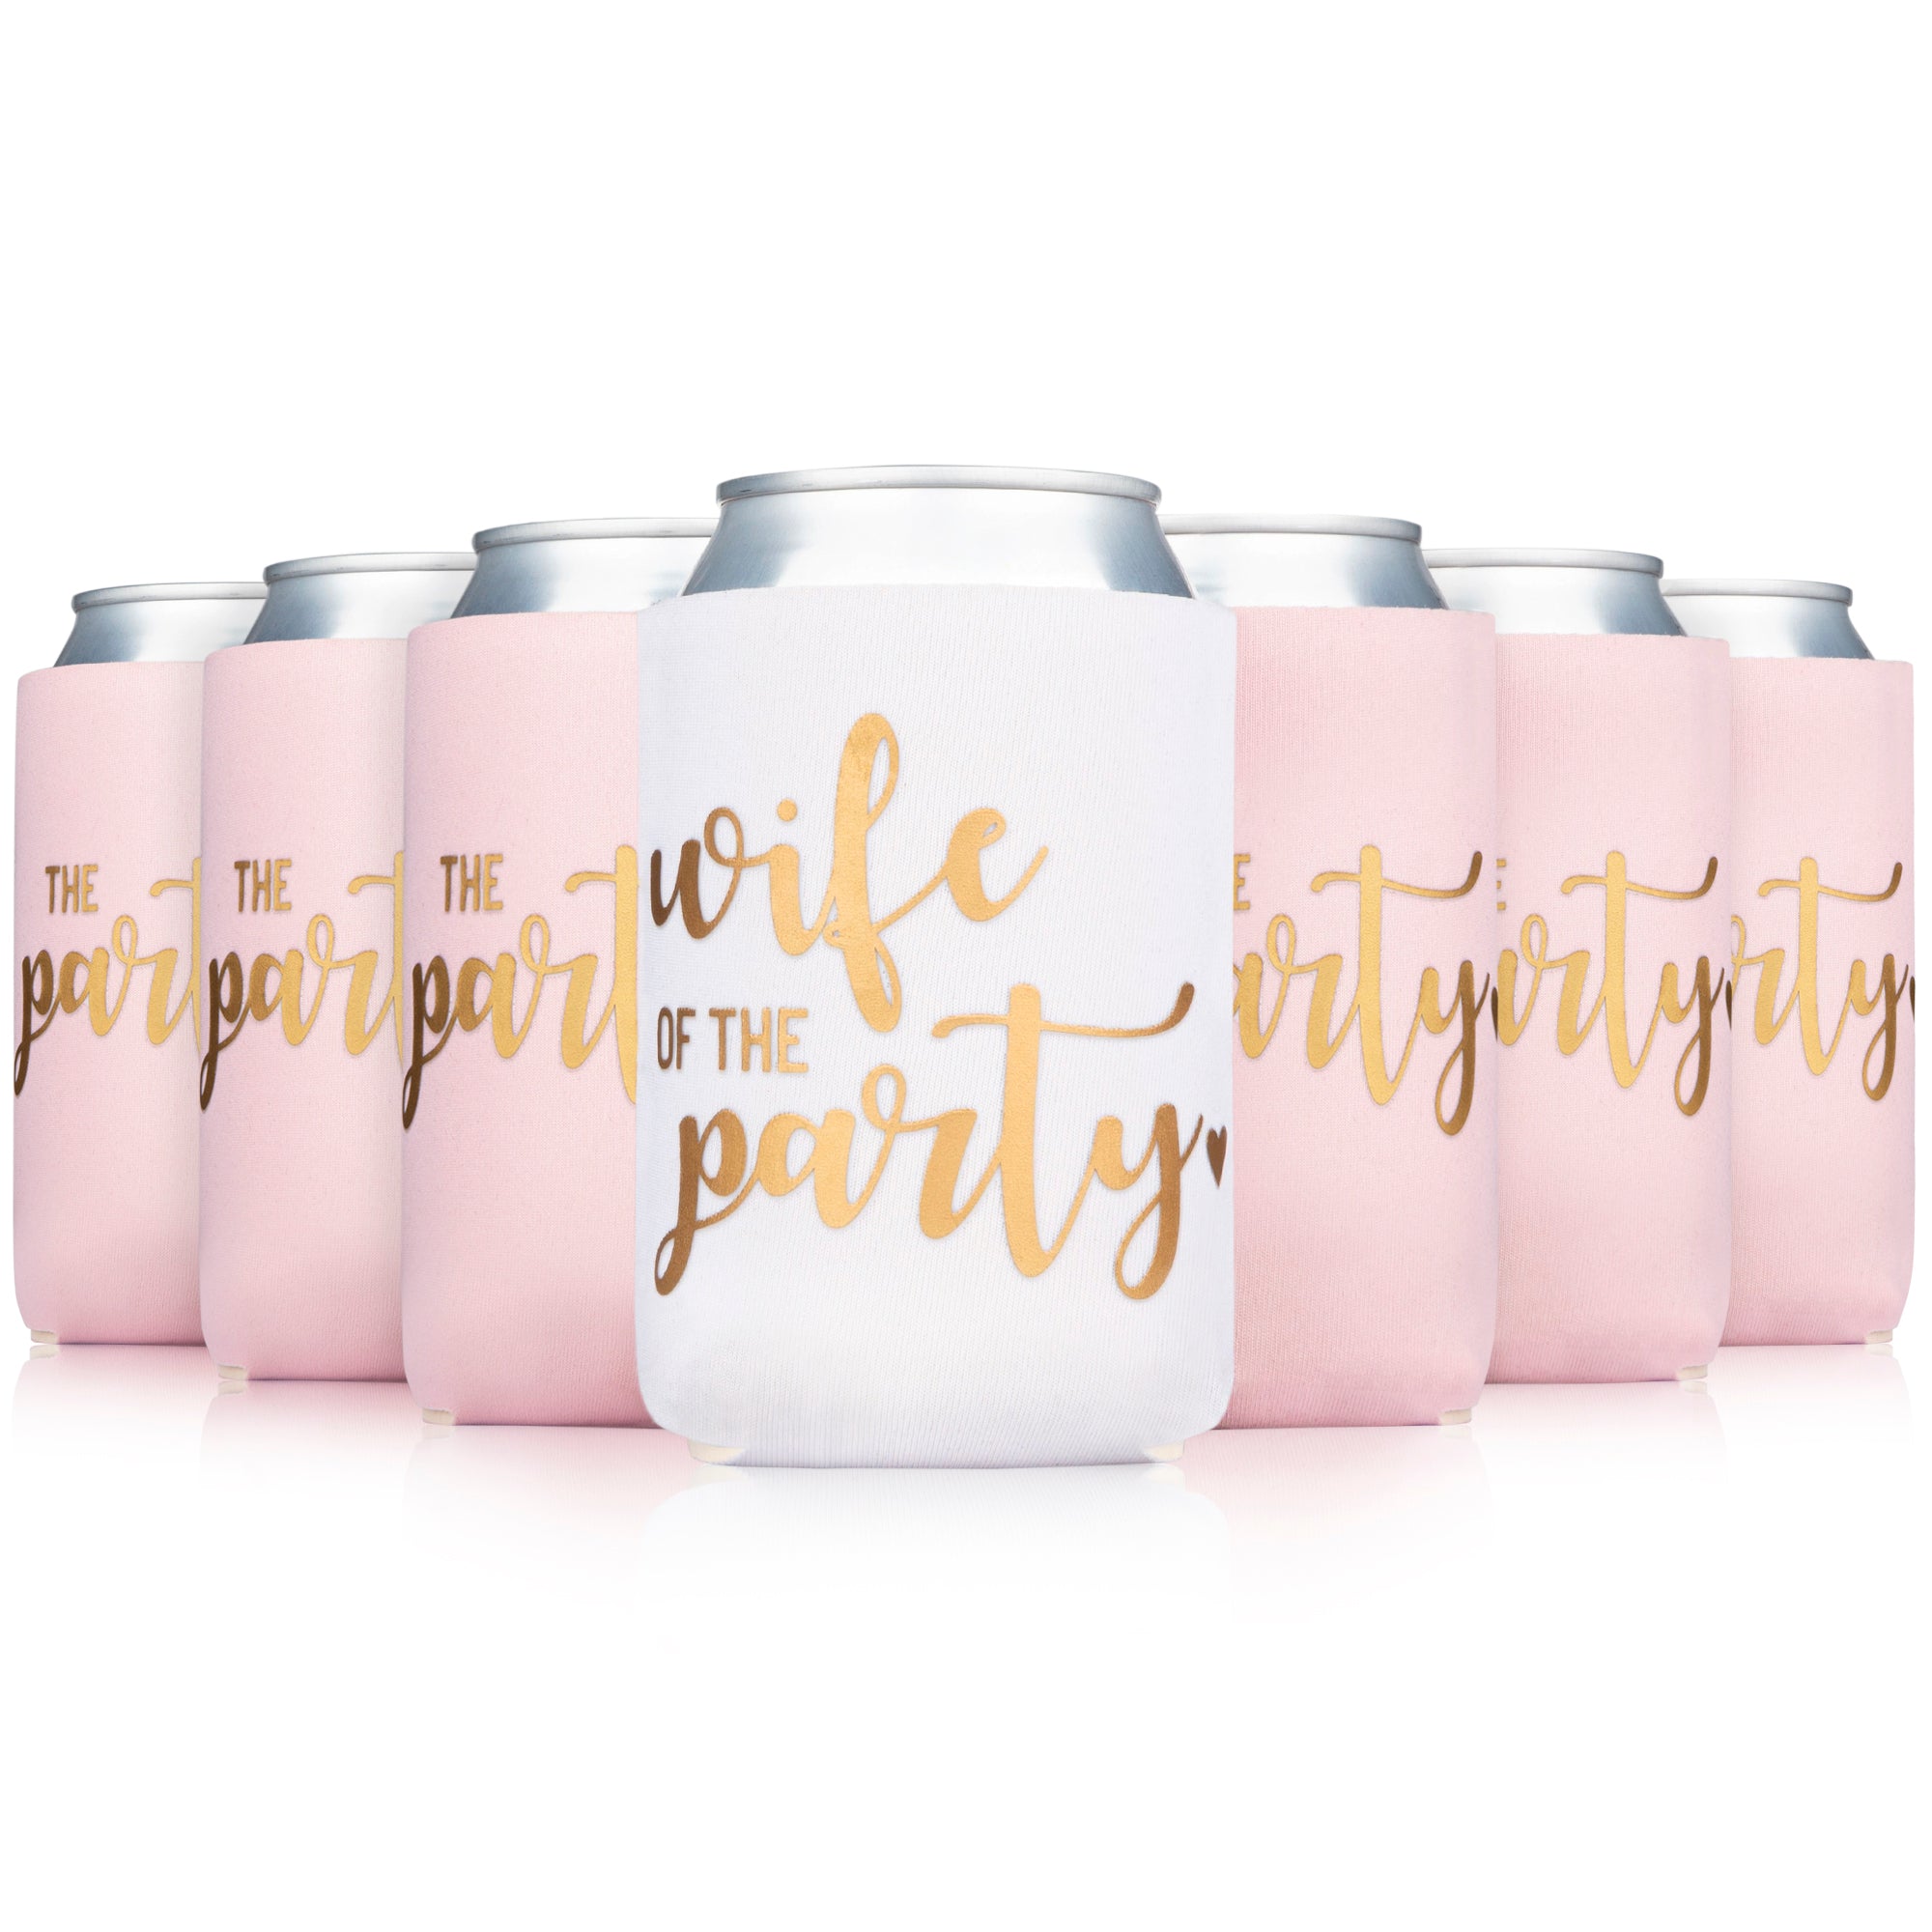 Can Koozies - Crazy About Cups